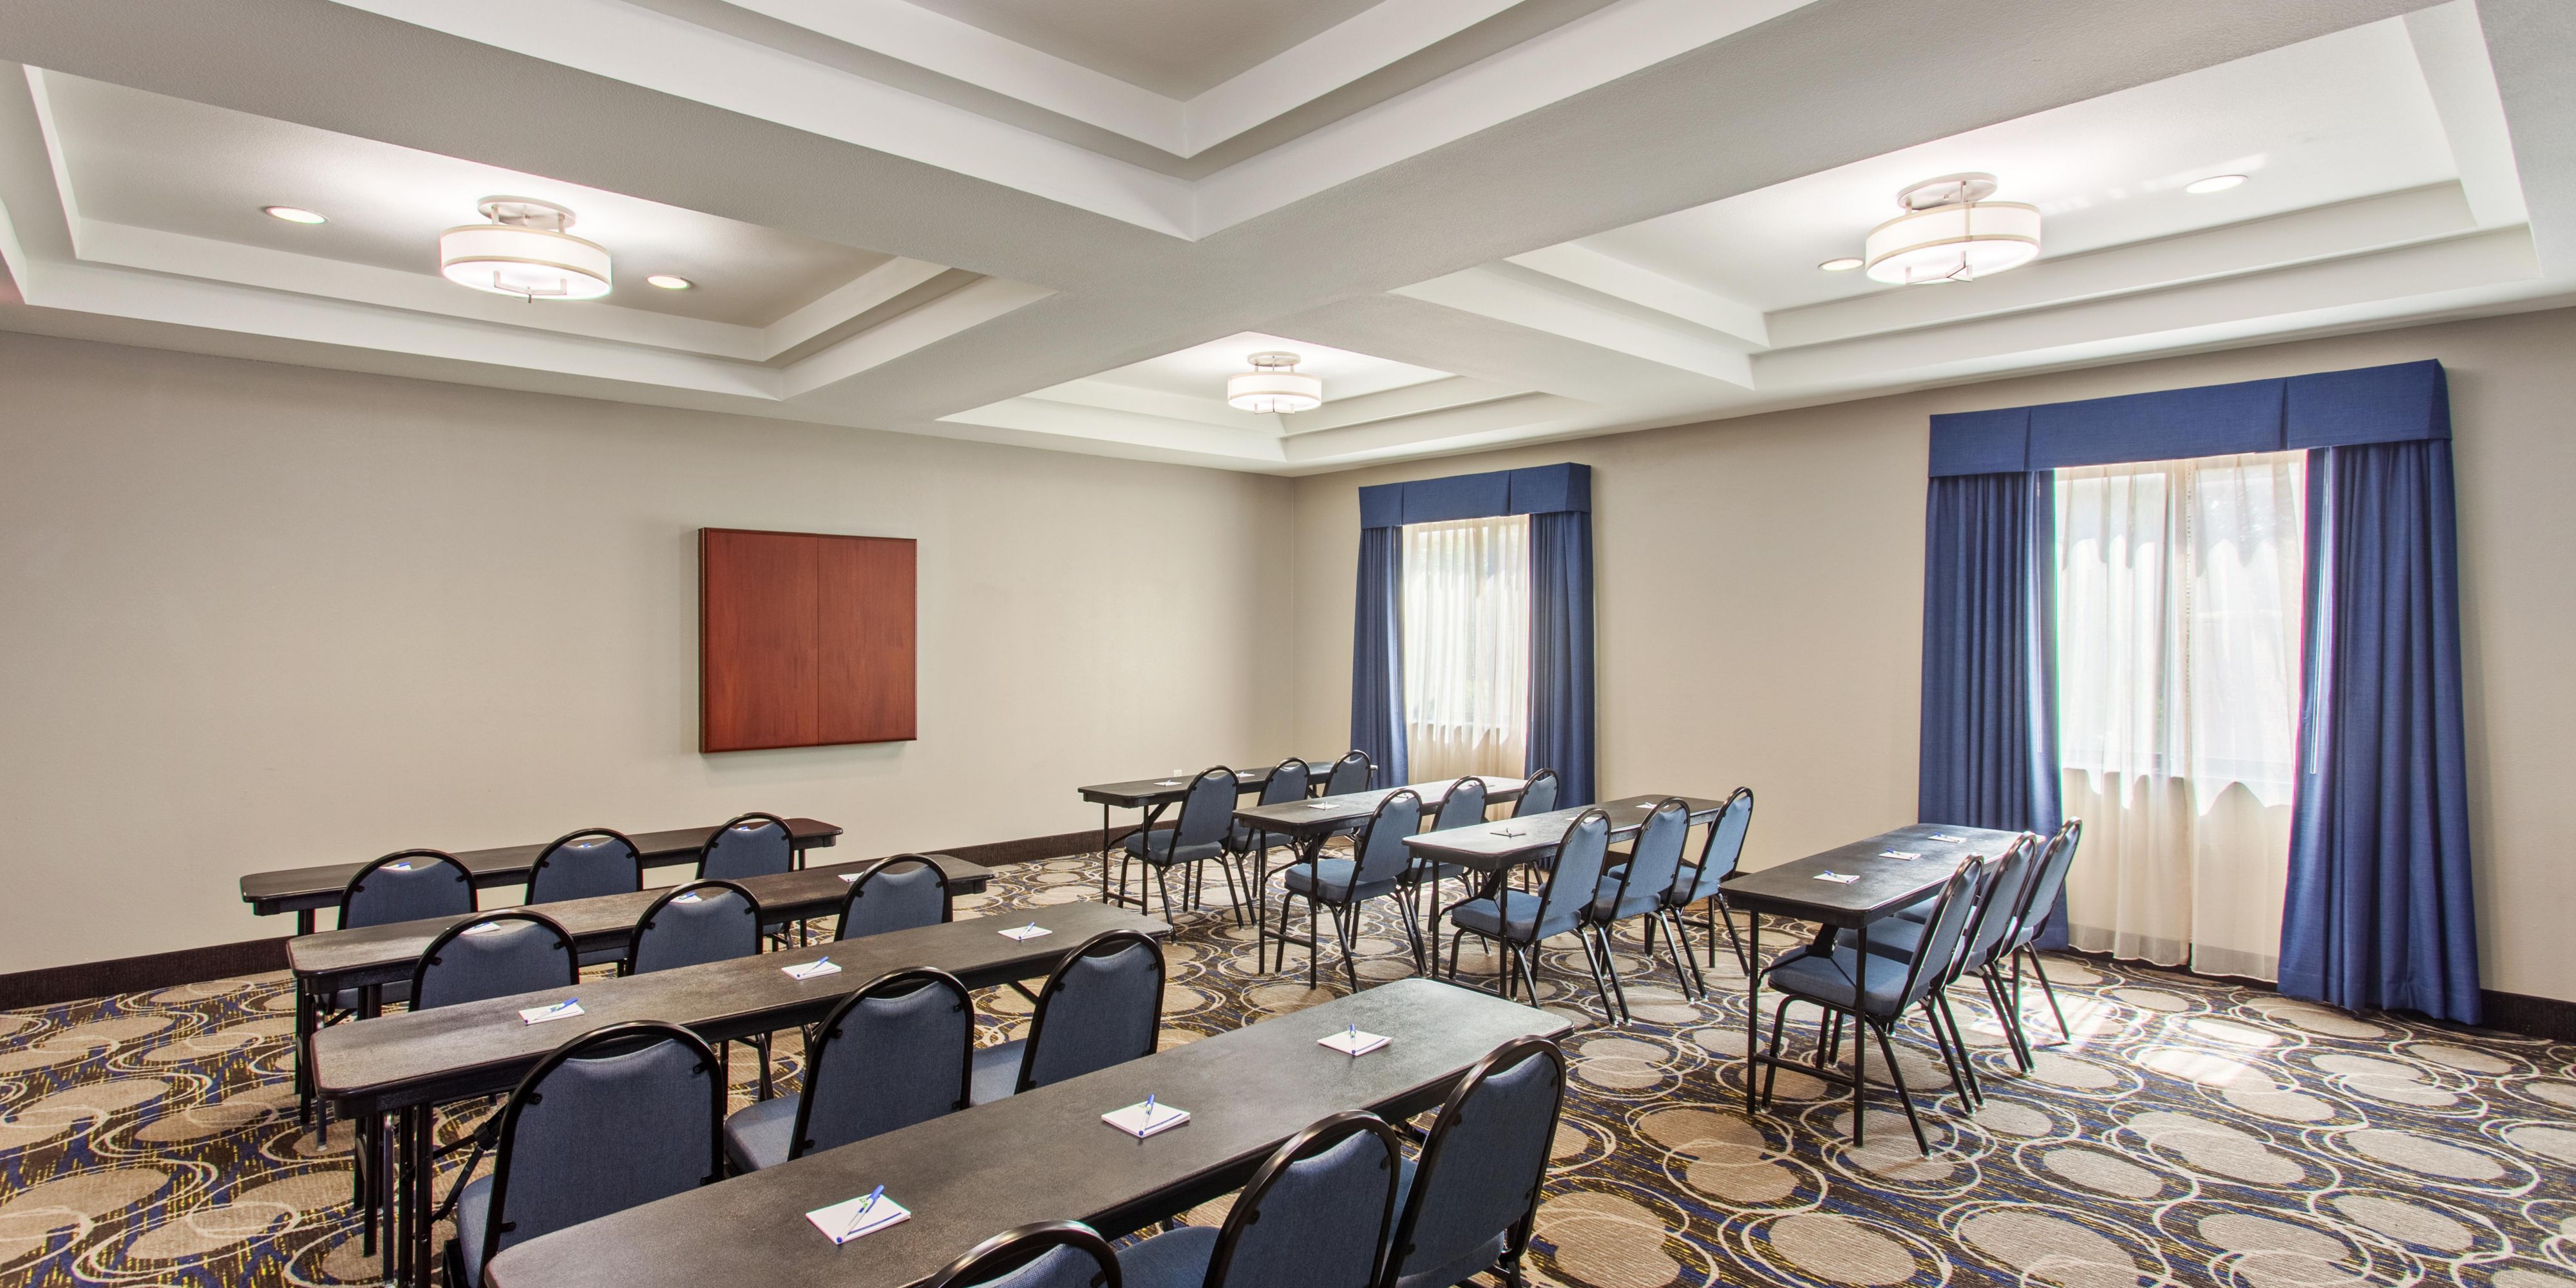 We have everything you need for your next meeting